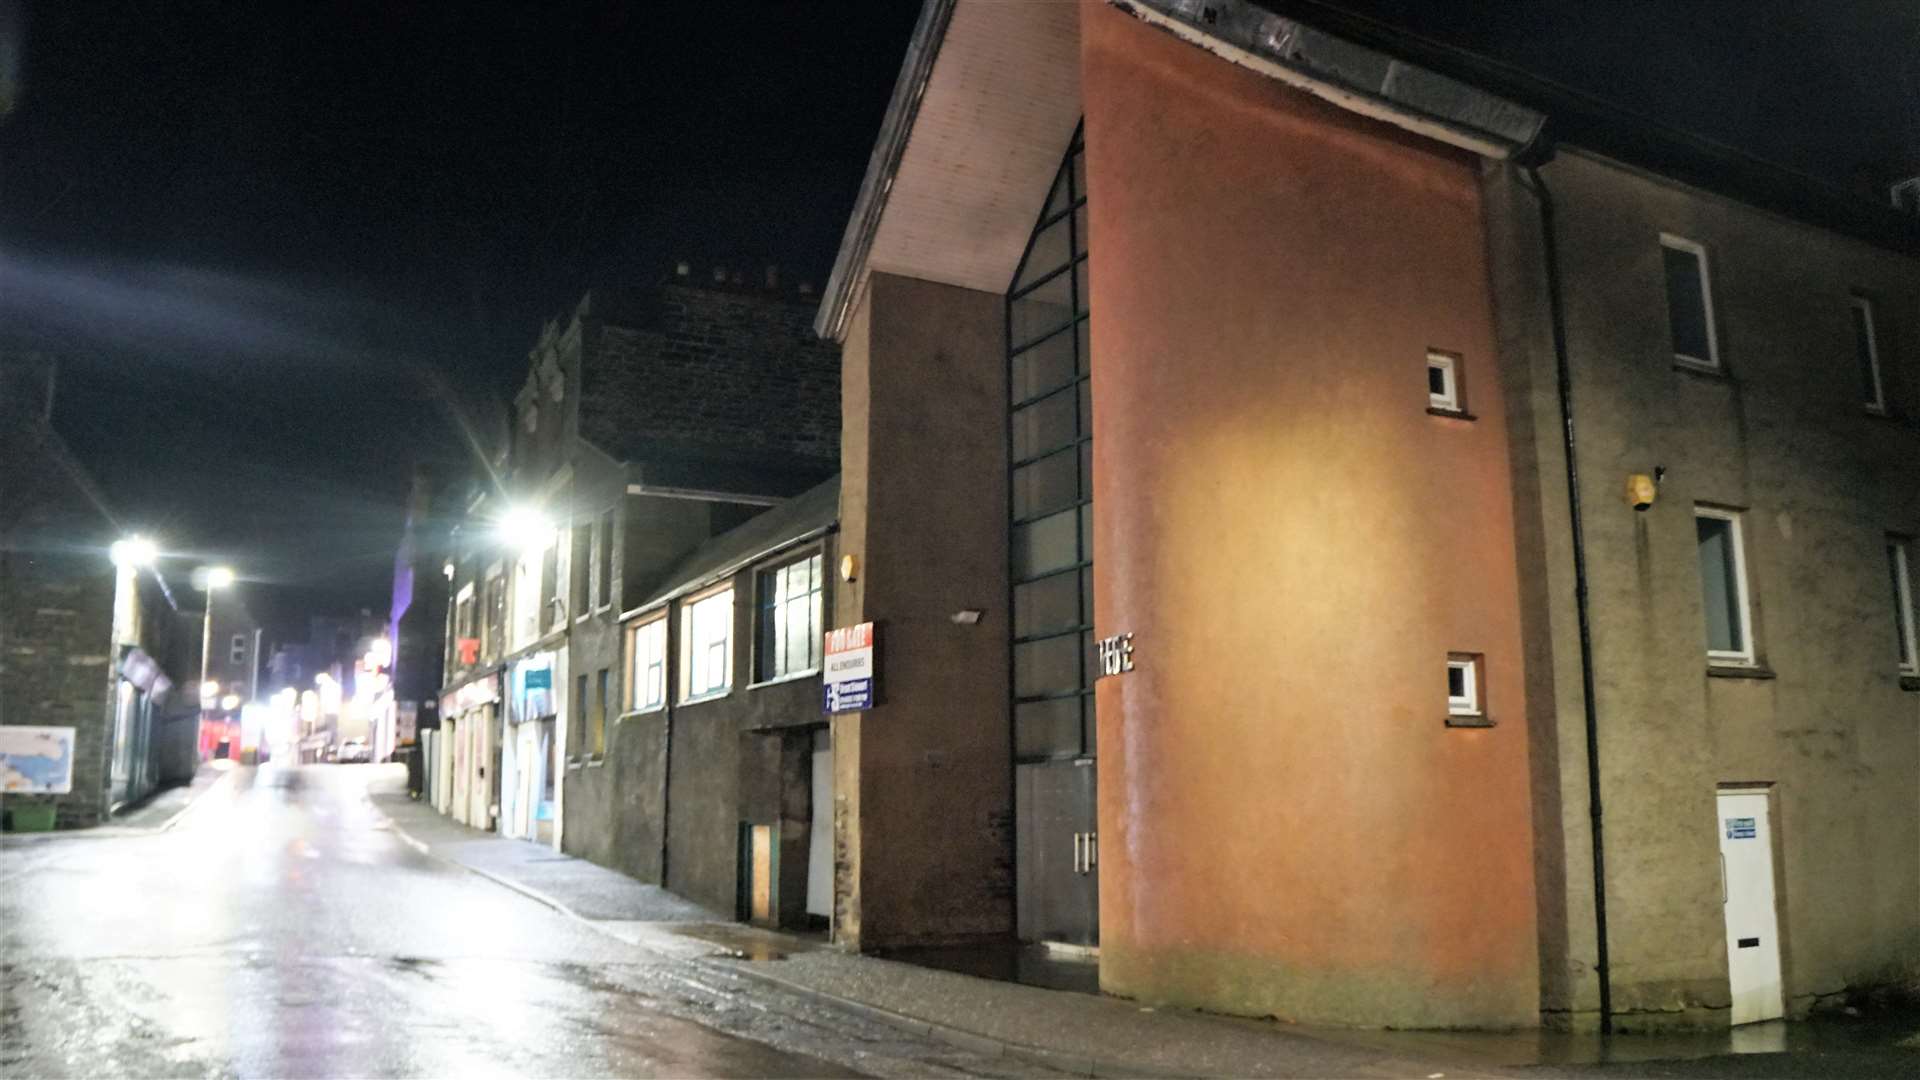 The owner of Valhalla talked about utilising the former college building adjacent as a fitness studio but nothing came of that plan. Picture: DGS